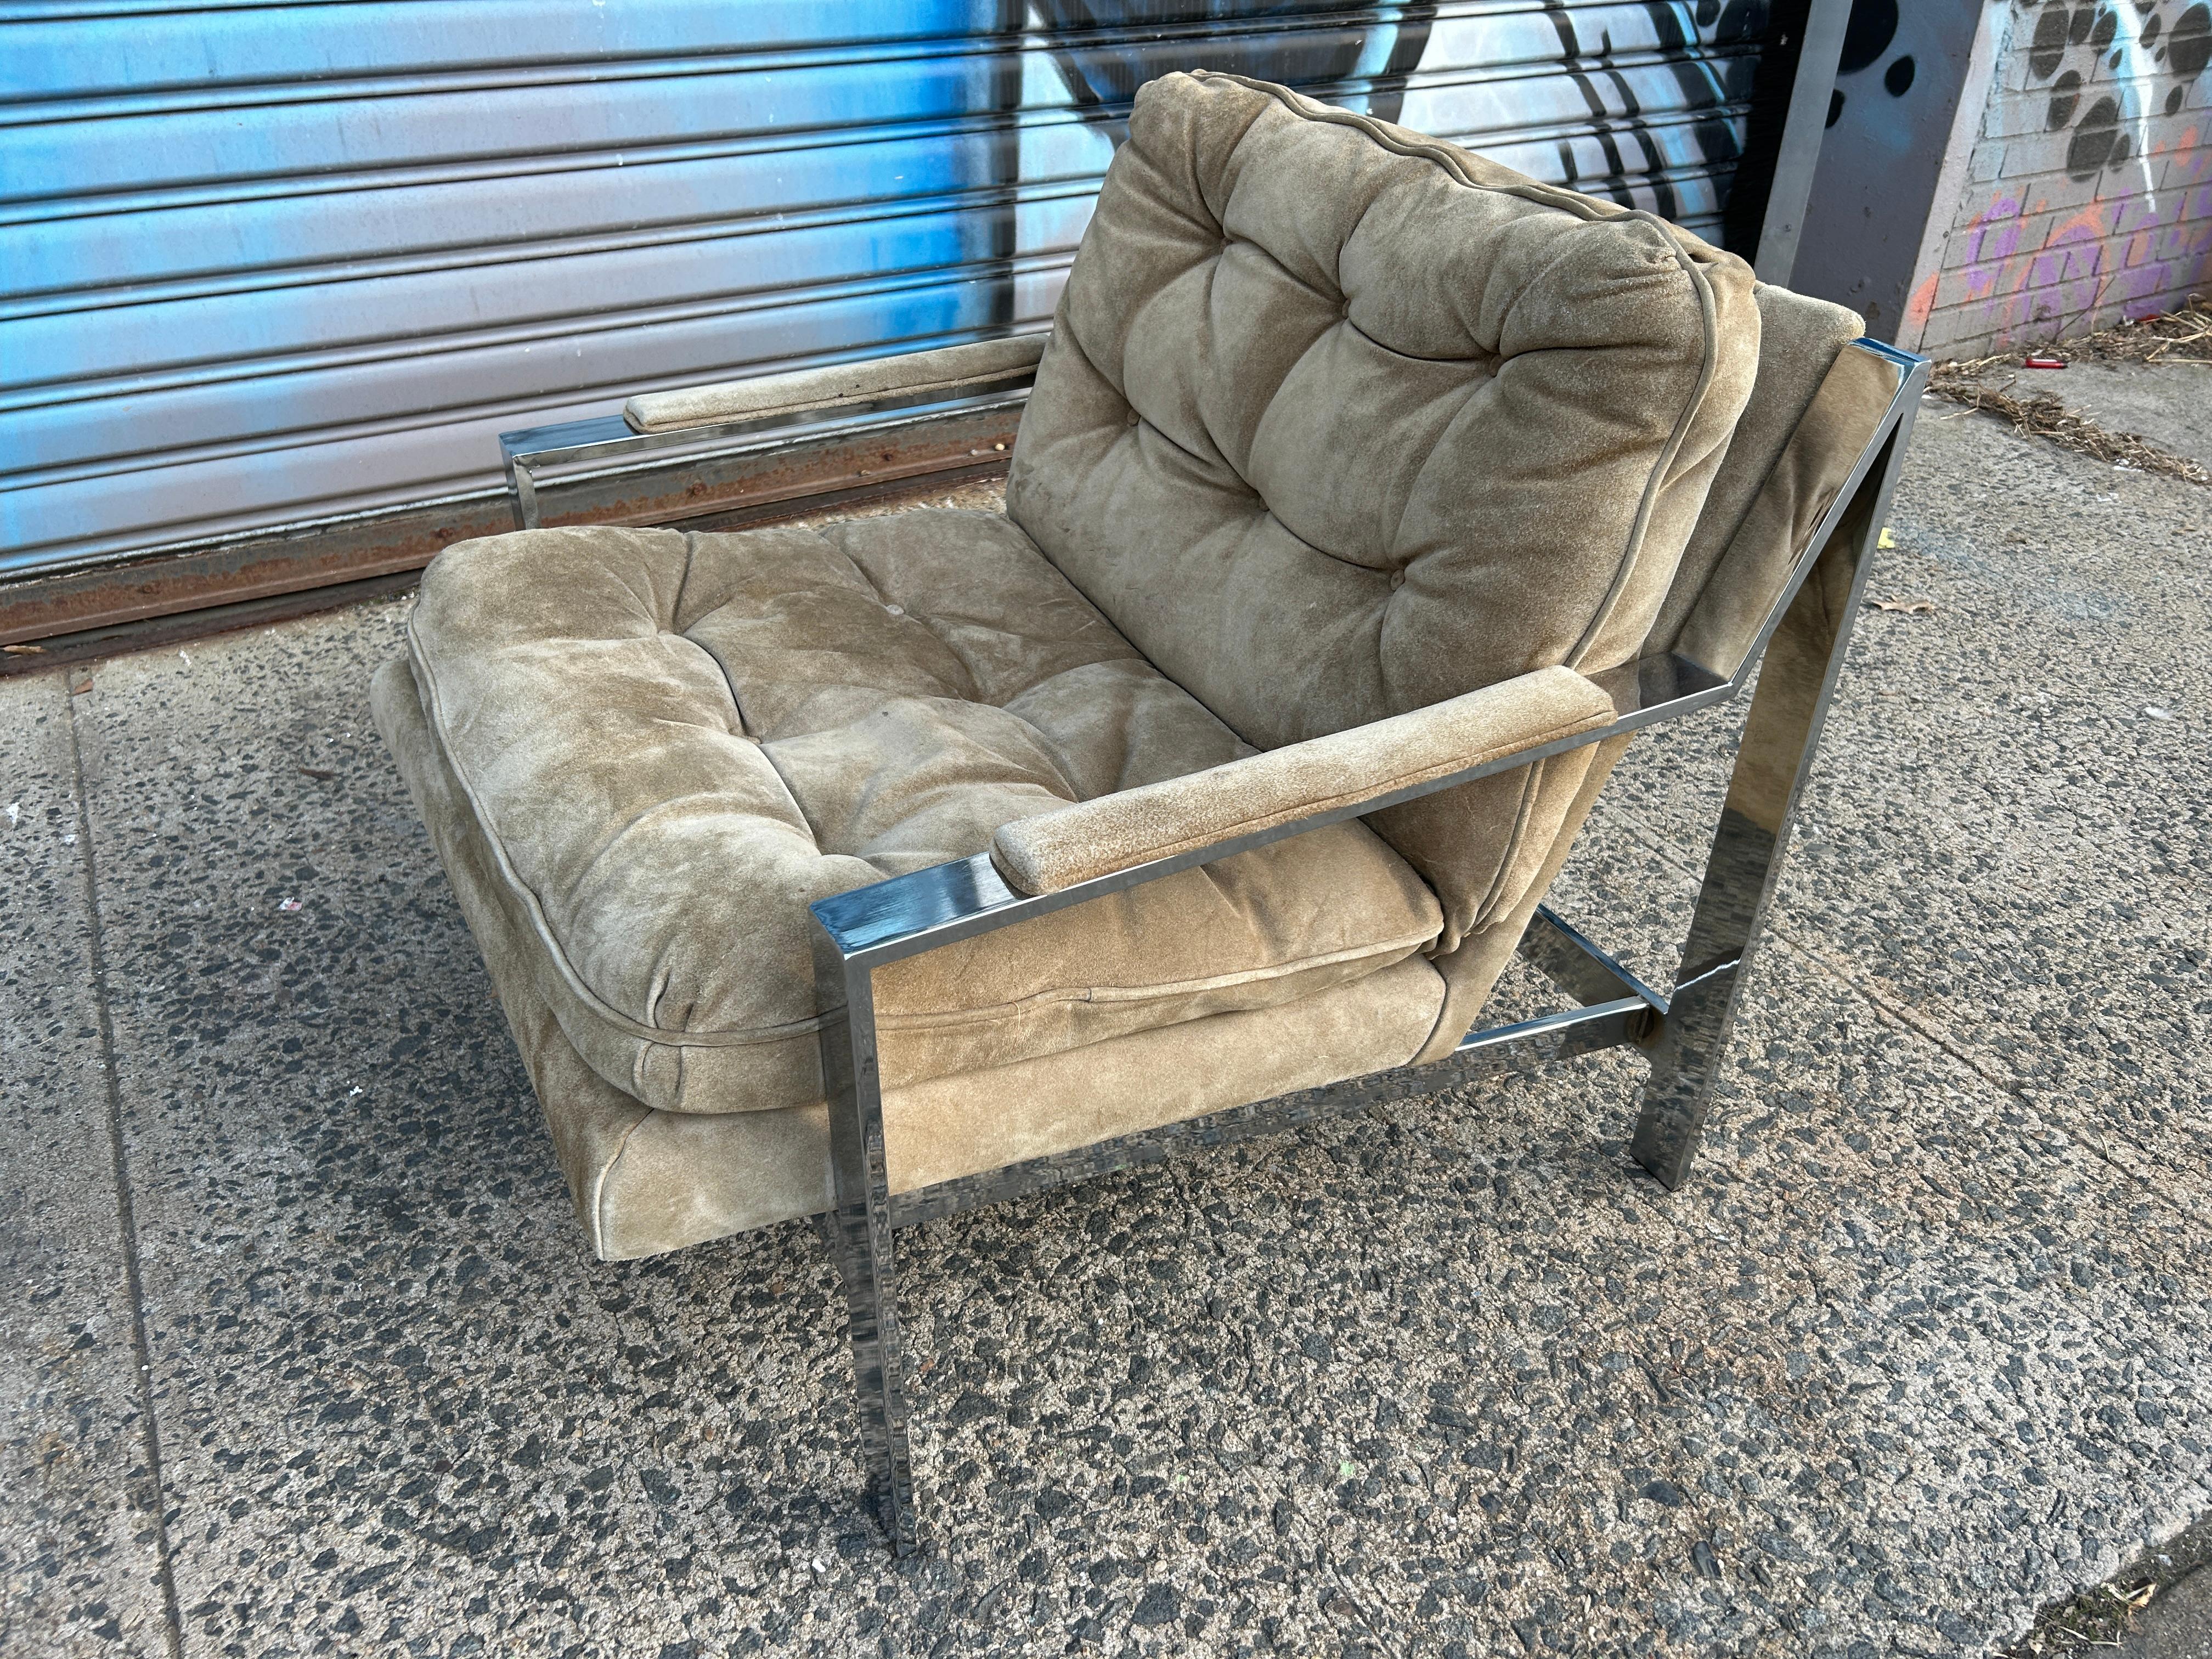 For your consideration is this iconic flat bar chrome lounge chair by Cy Mann.
Original leather suede upholstery in beige tan. Cy Mann is mostly recognized for this chrome lounge chair and other 1970s designs similar to Milo Baughman and Leon Rosen